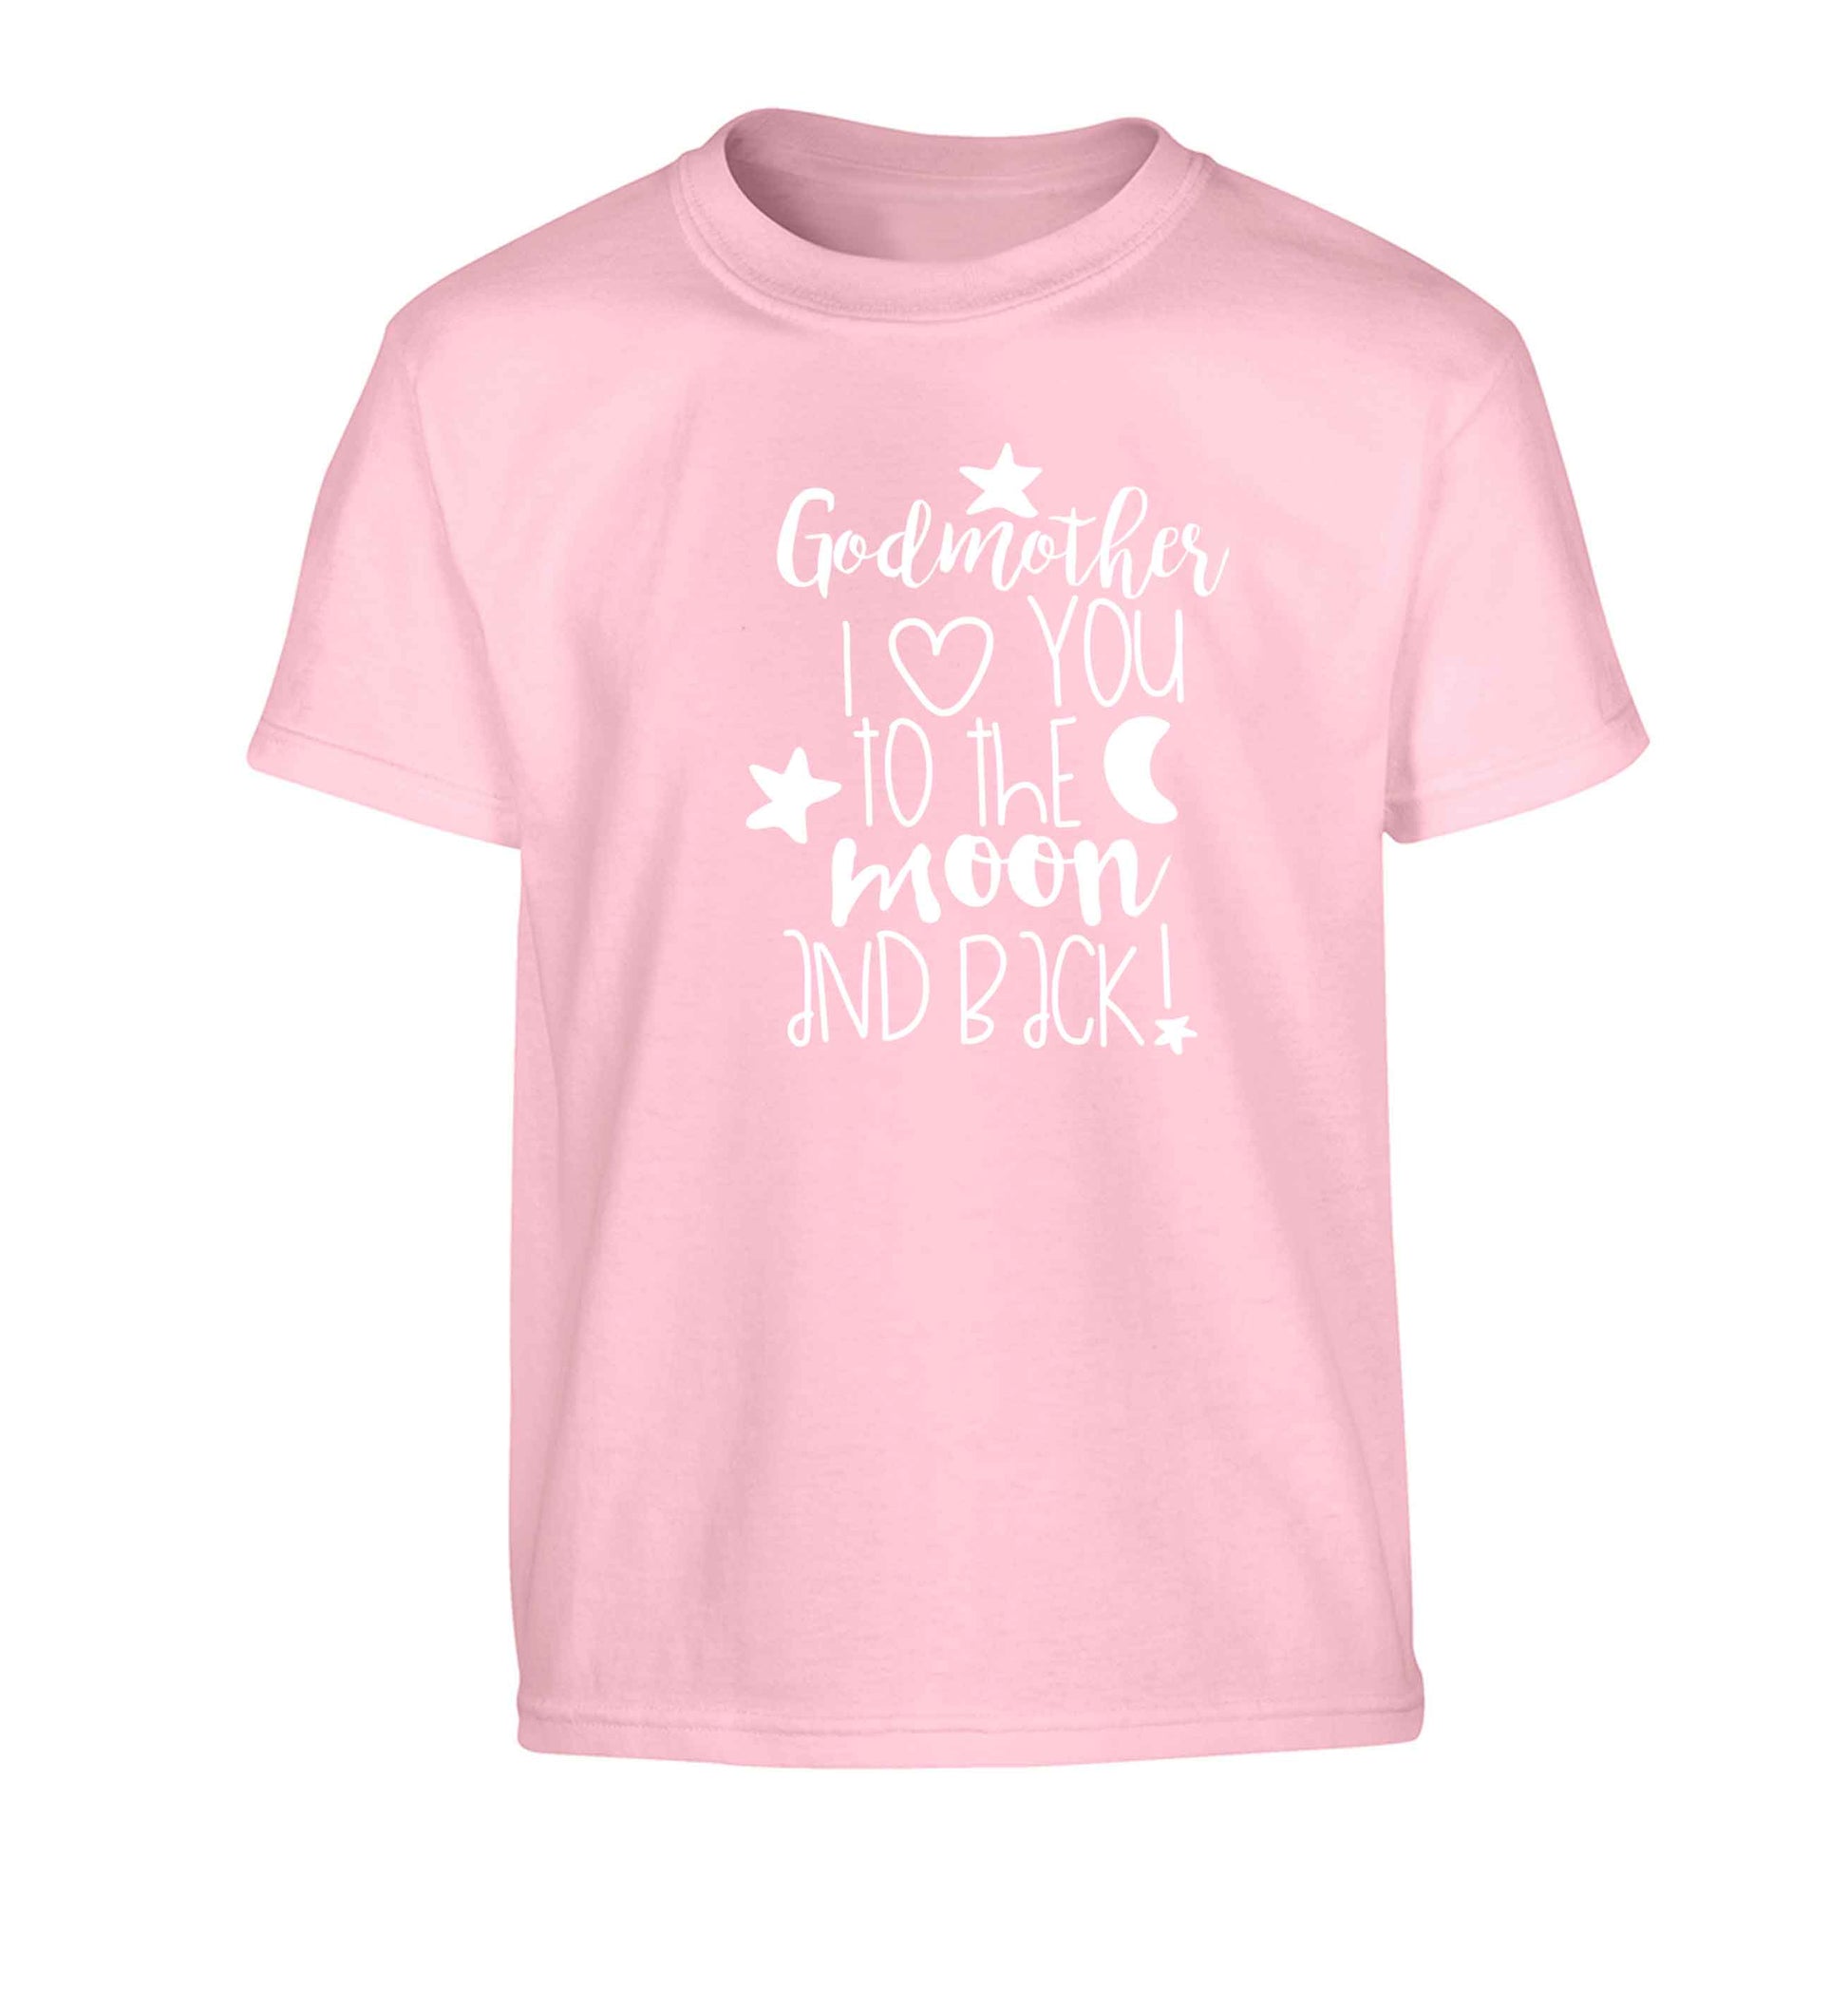 Godmother I love you to the moon and back Children's light pink Tshirt 12-13 Years